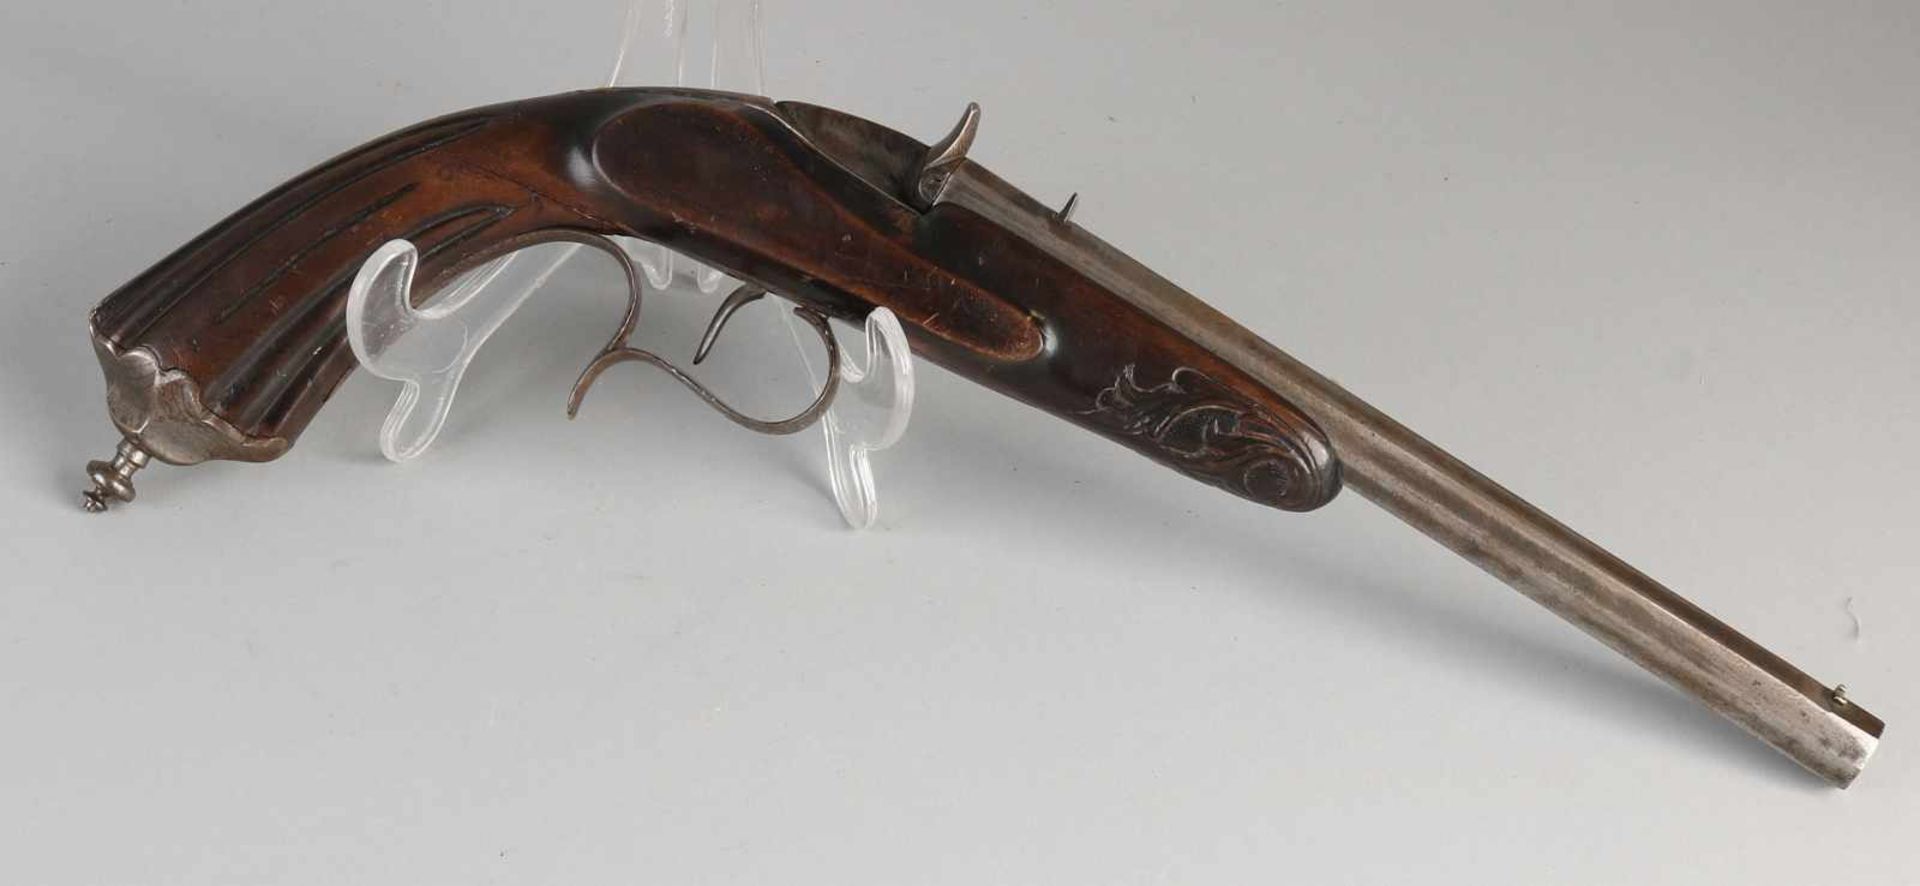 Antique pistol with octagonal barrel and Rococo engravings. Circa 1800. Dimensions: L 36 cm. In good